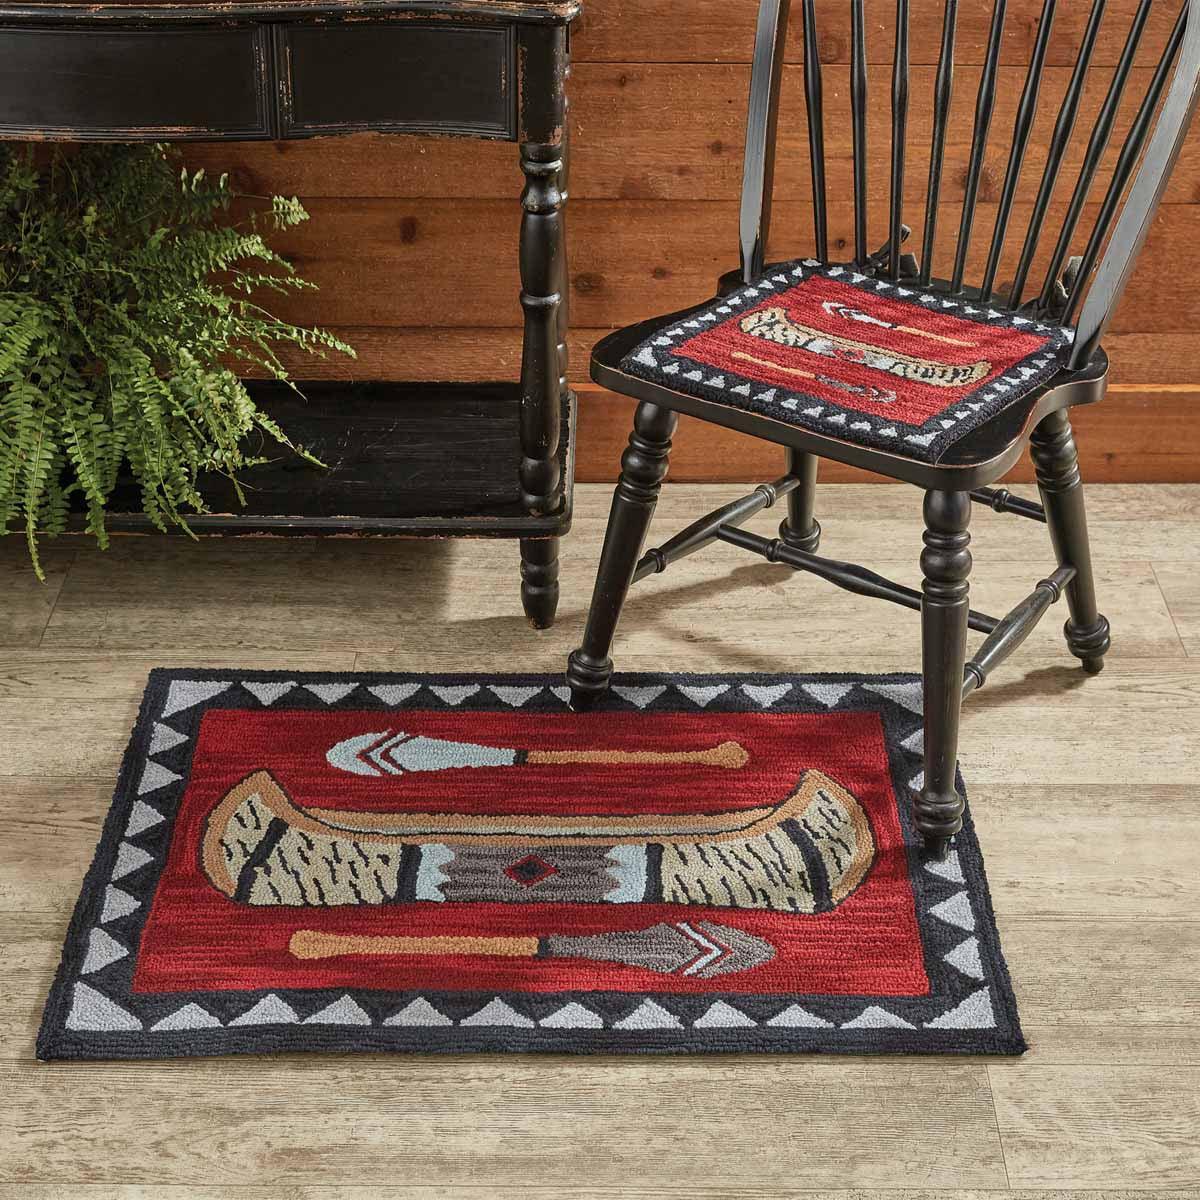 Wilderness Canoe Hooked Chair Pad Park Designs - The Fox Decor